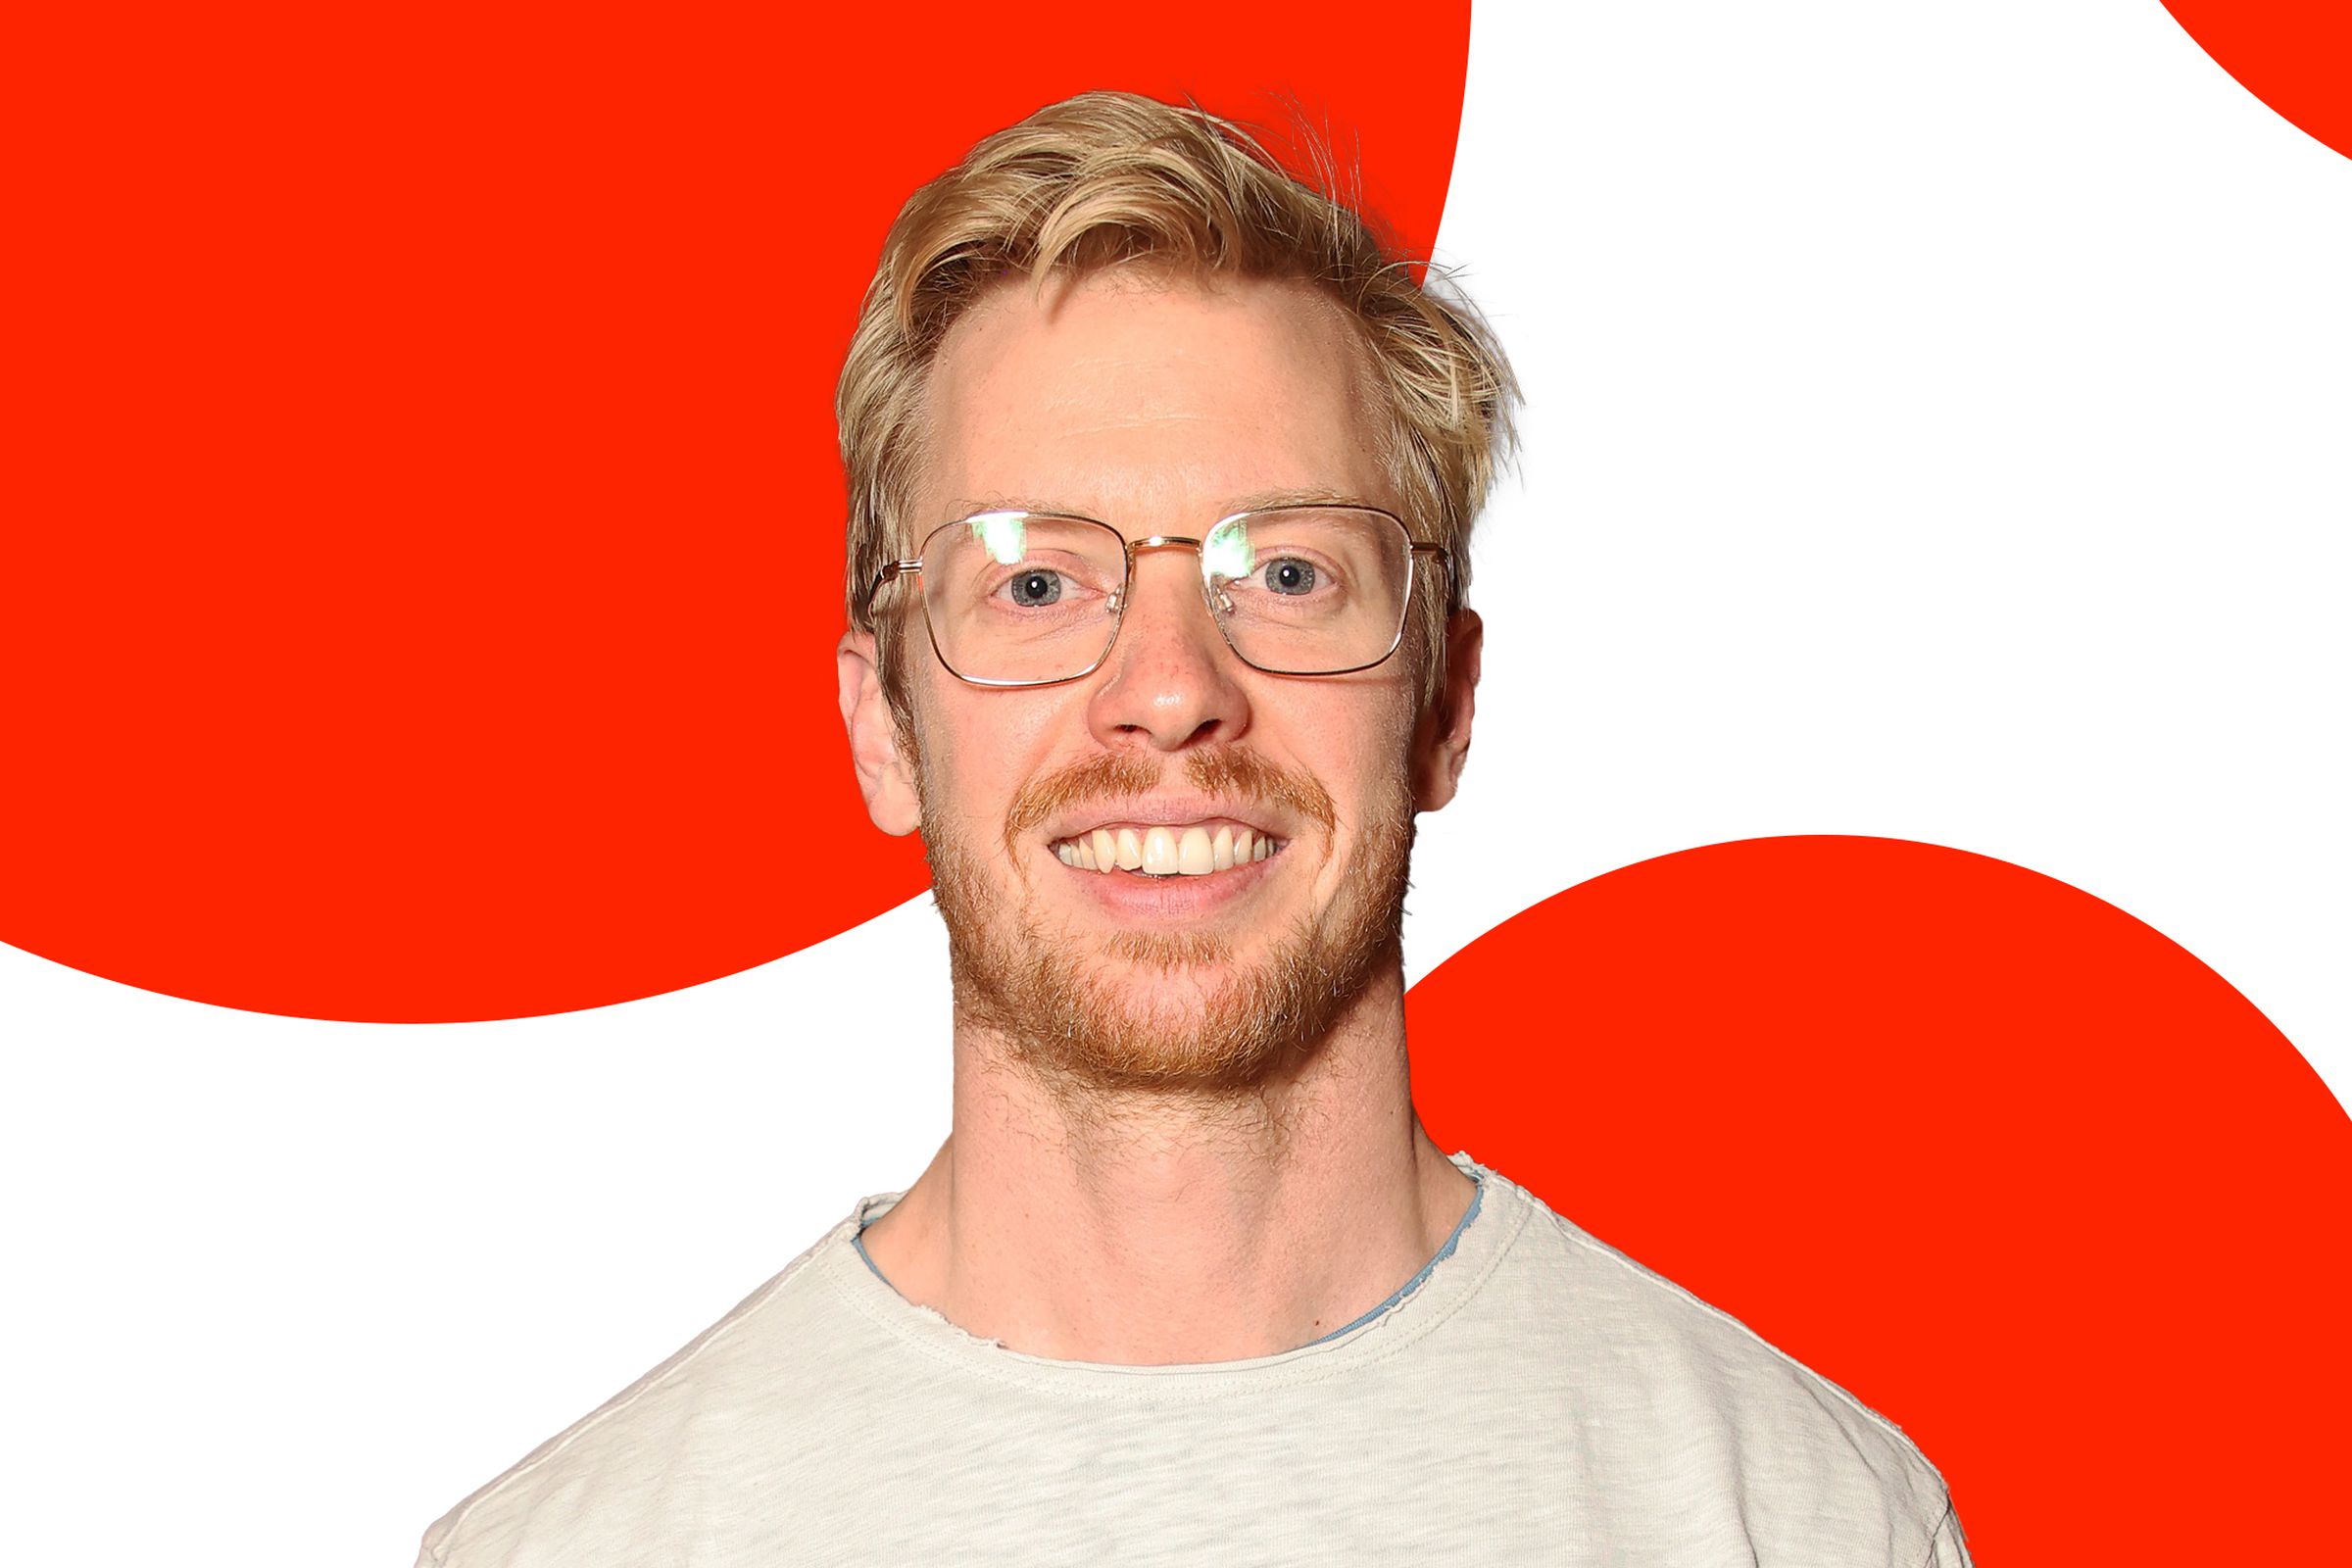 A photo of Reddit CEO Steve Huffman over an orange and white background.